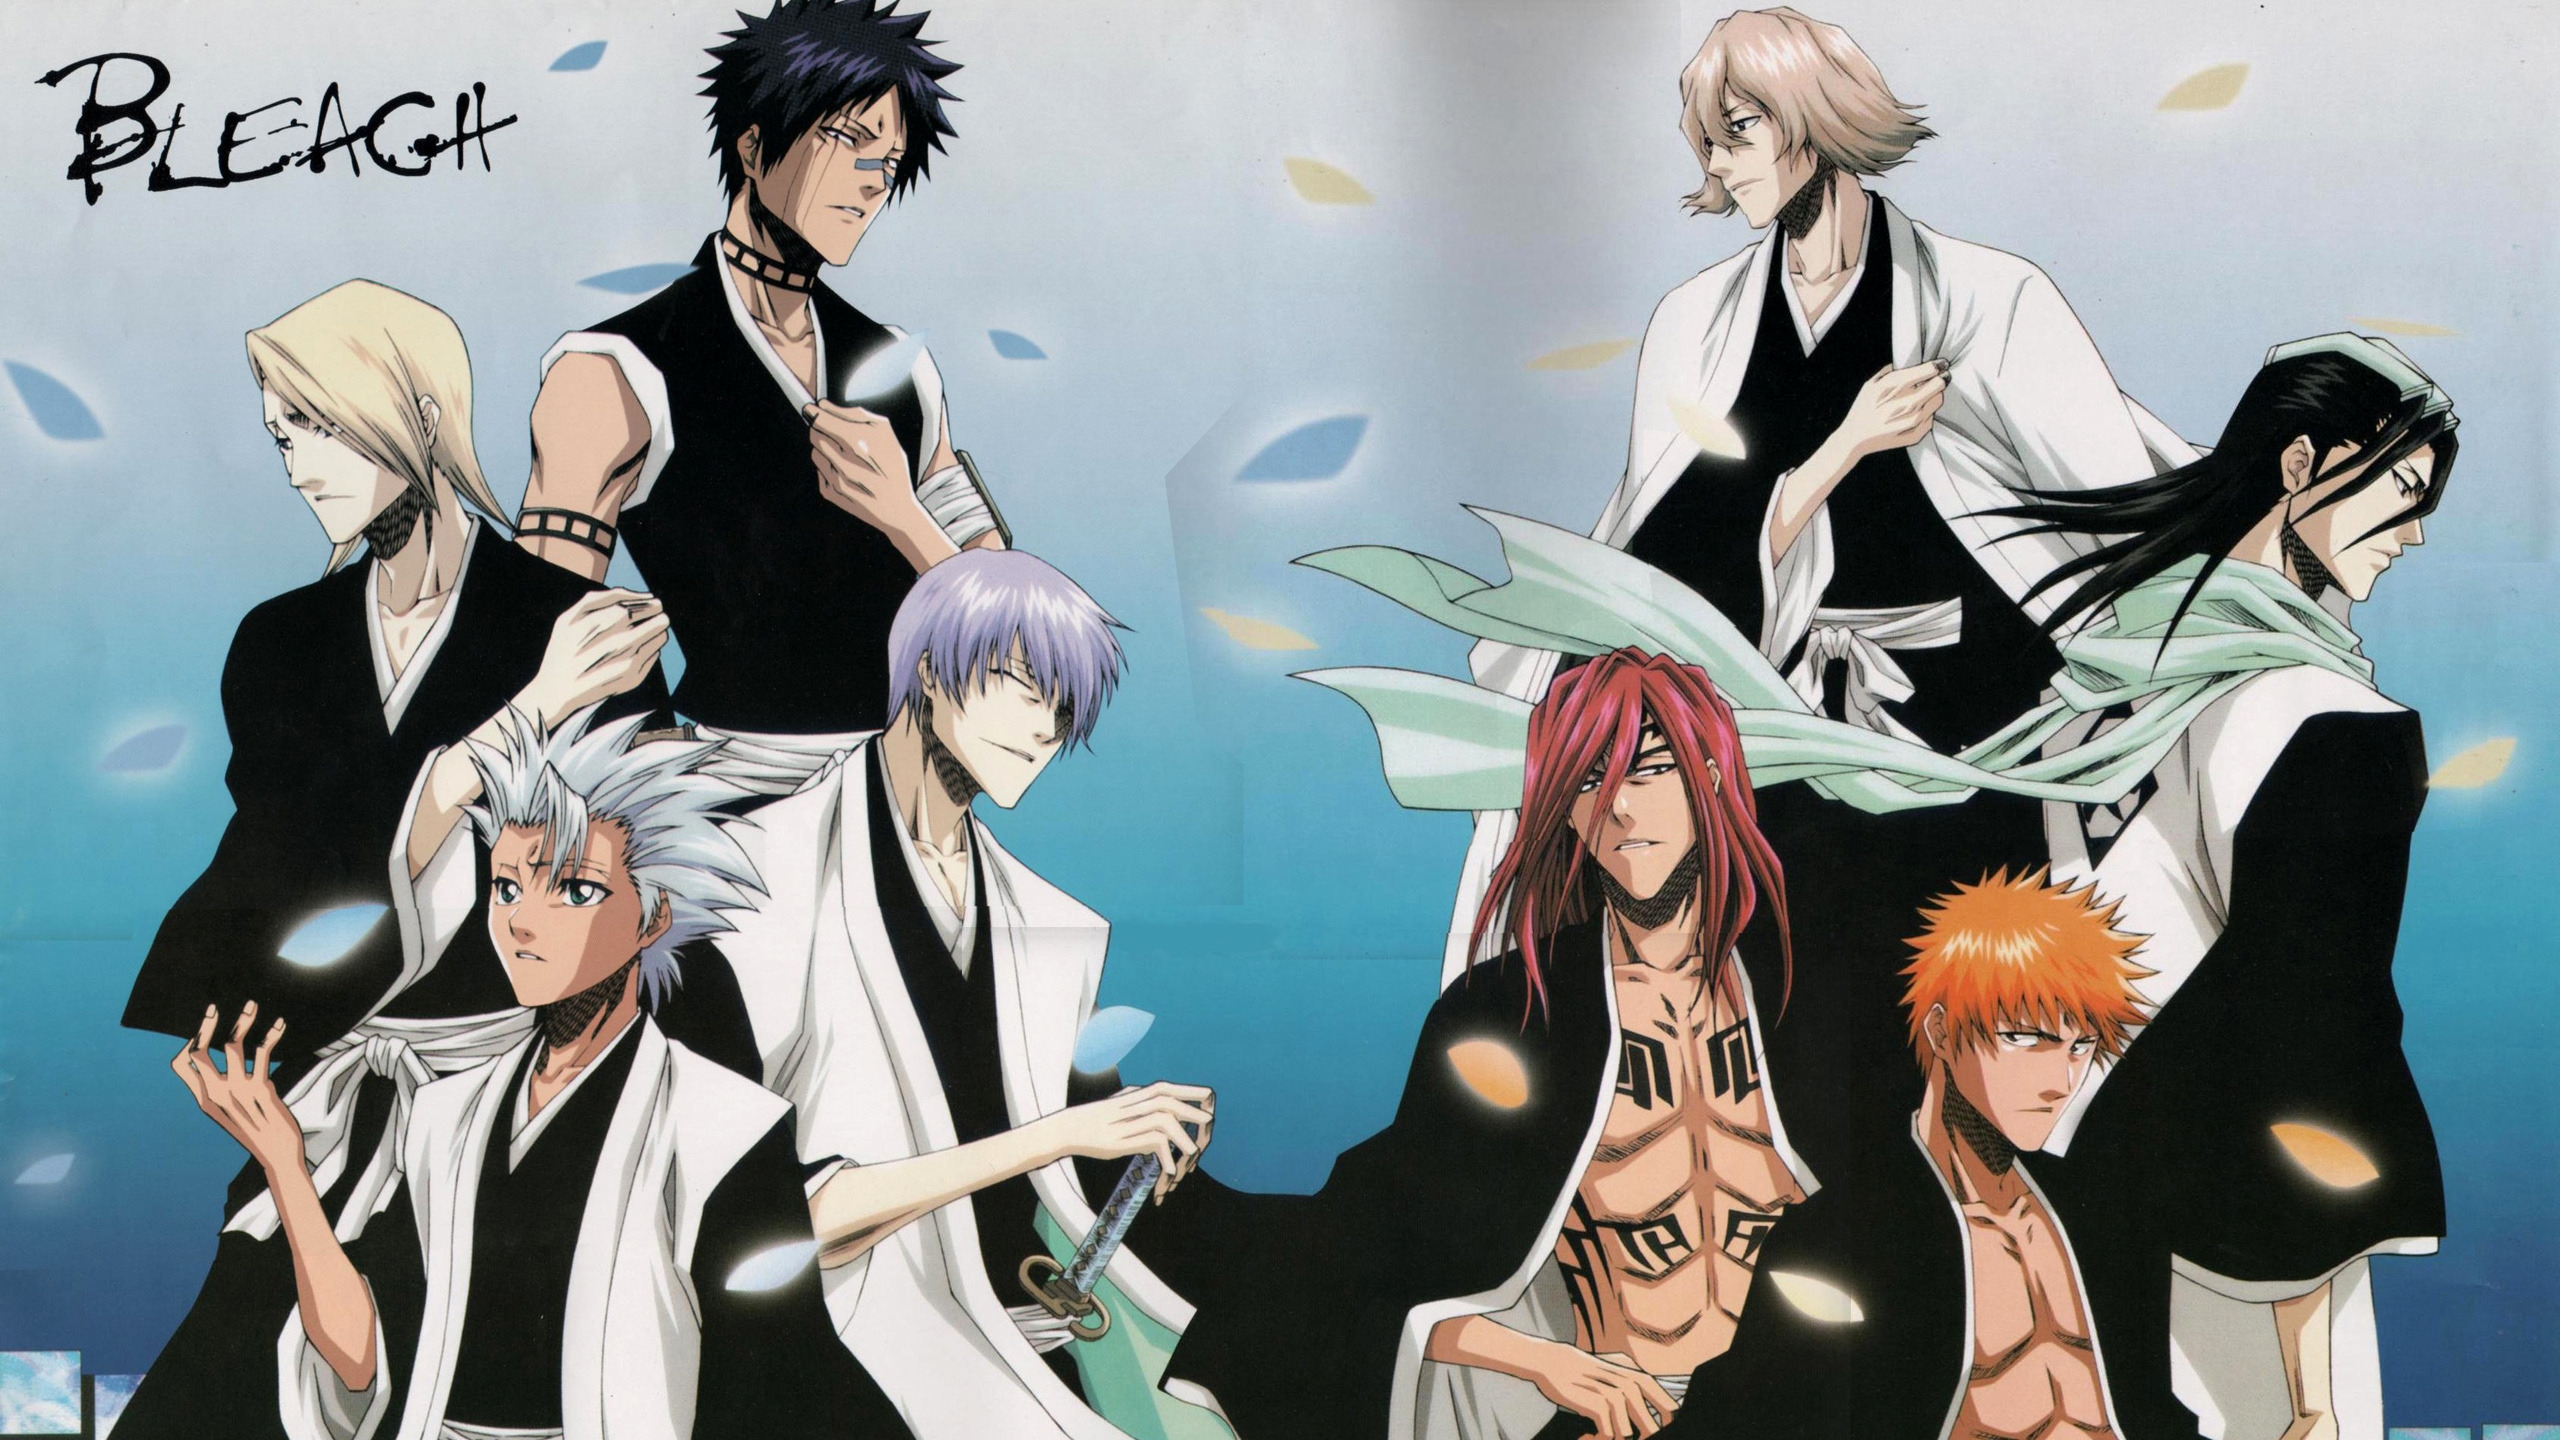 Bleach Anime Characters for 2560x1440 HDTV resolution